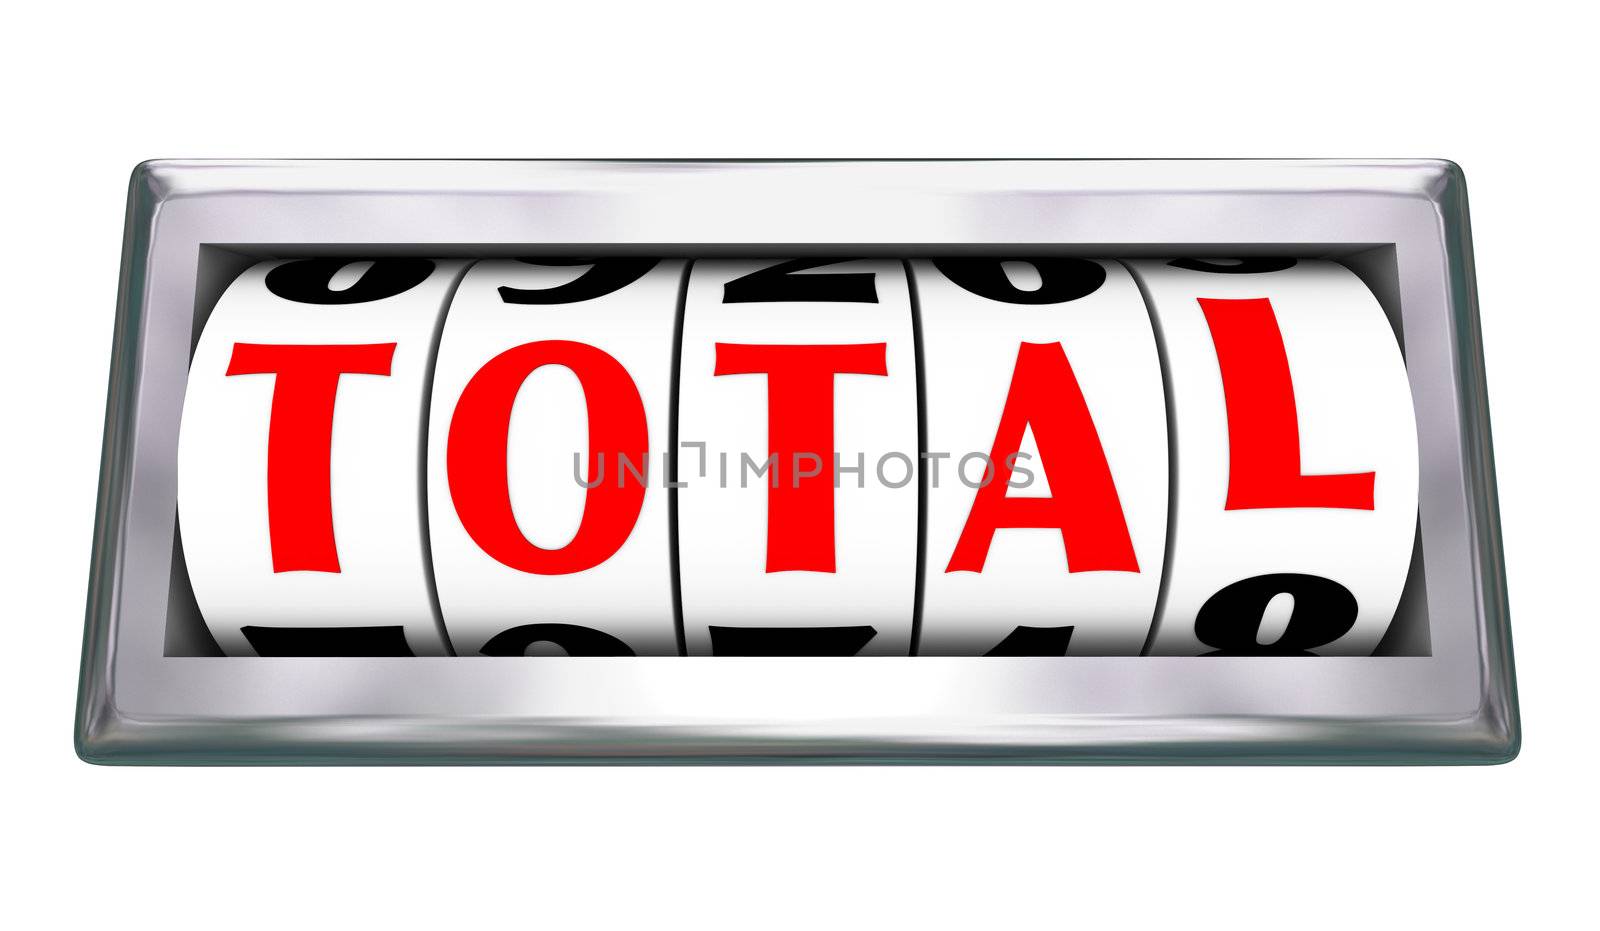 The letters in the word Total lining up on an odometer or slot wheels to show an ultimate number being added to measure money or other object